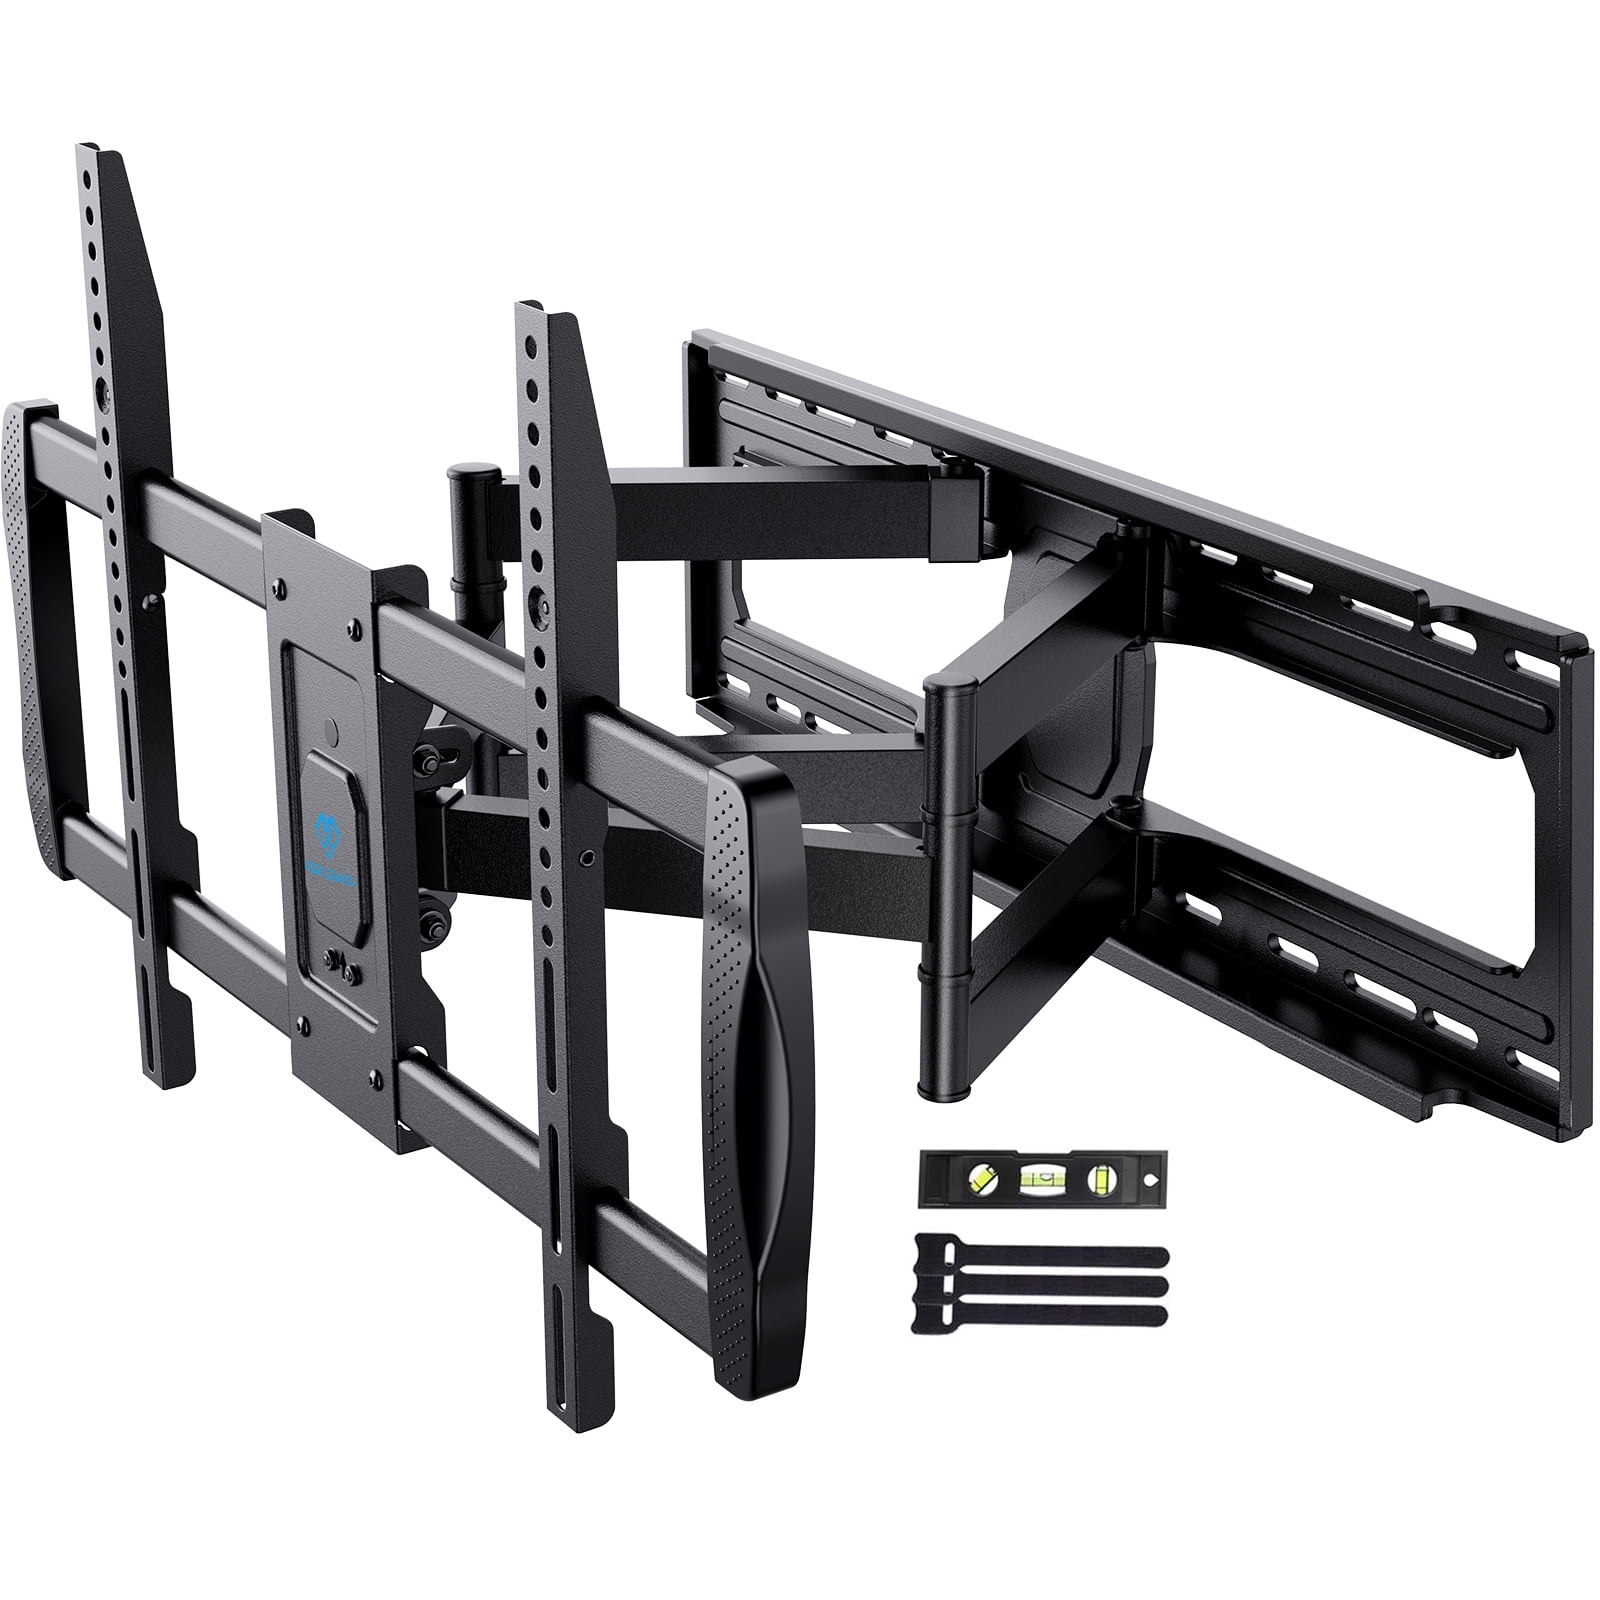 ECHOGEAR Full Motion Articulating TV Wall Mount Bracket for TVs Up to 75" Extends from The Wall 16" with Smooth Swivel ＆ Tilt Simple 3-Step Insta